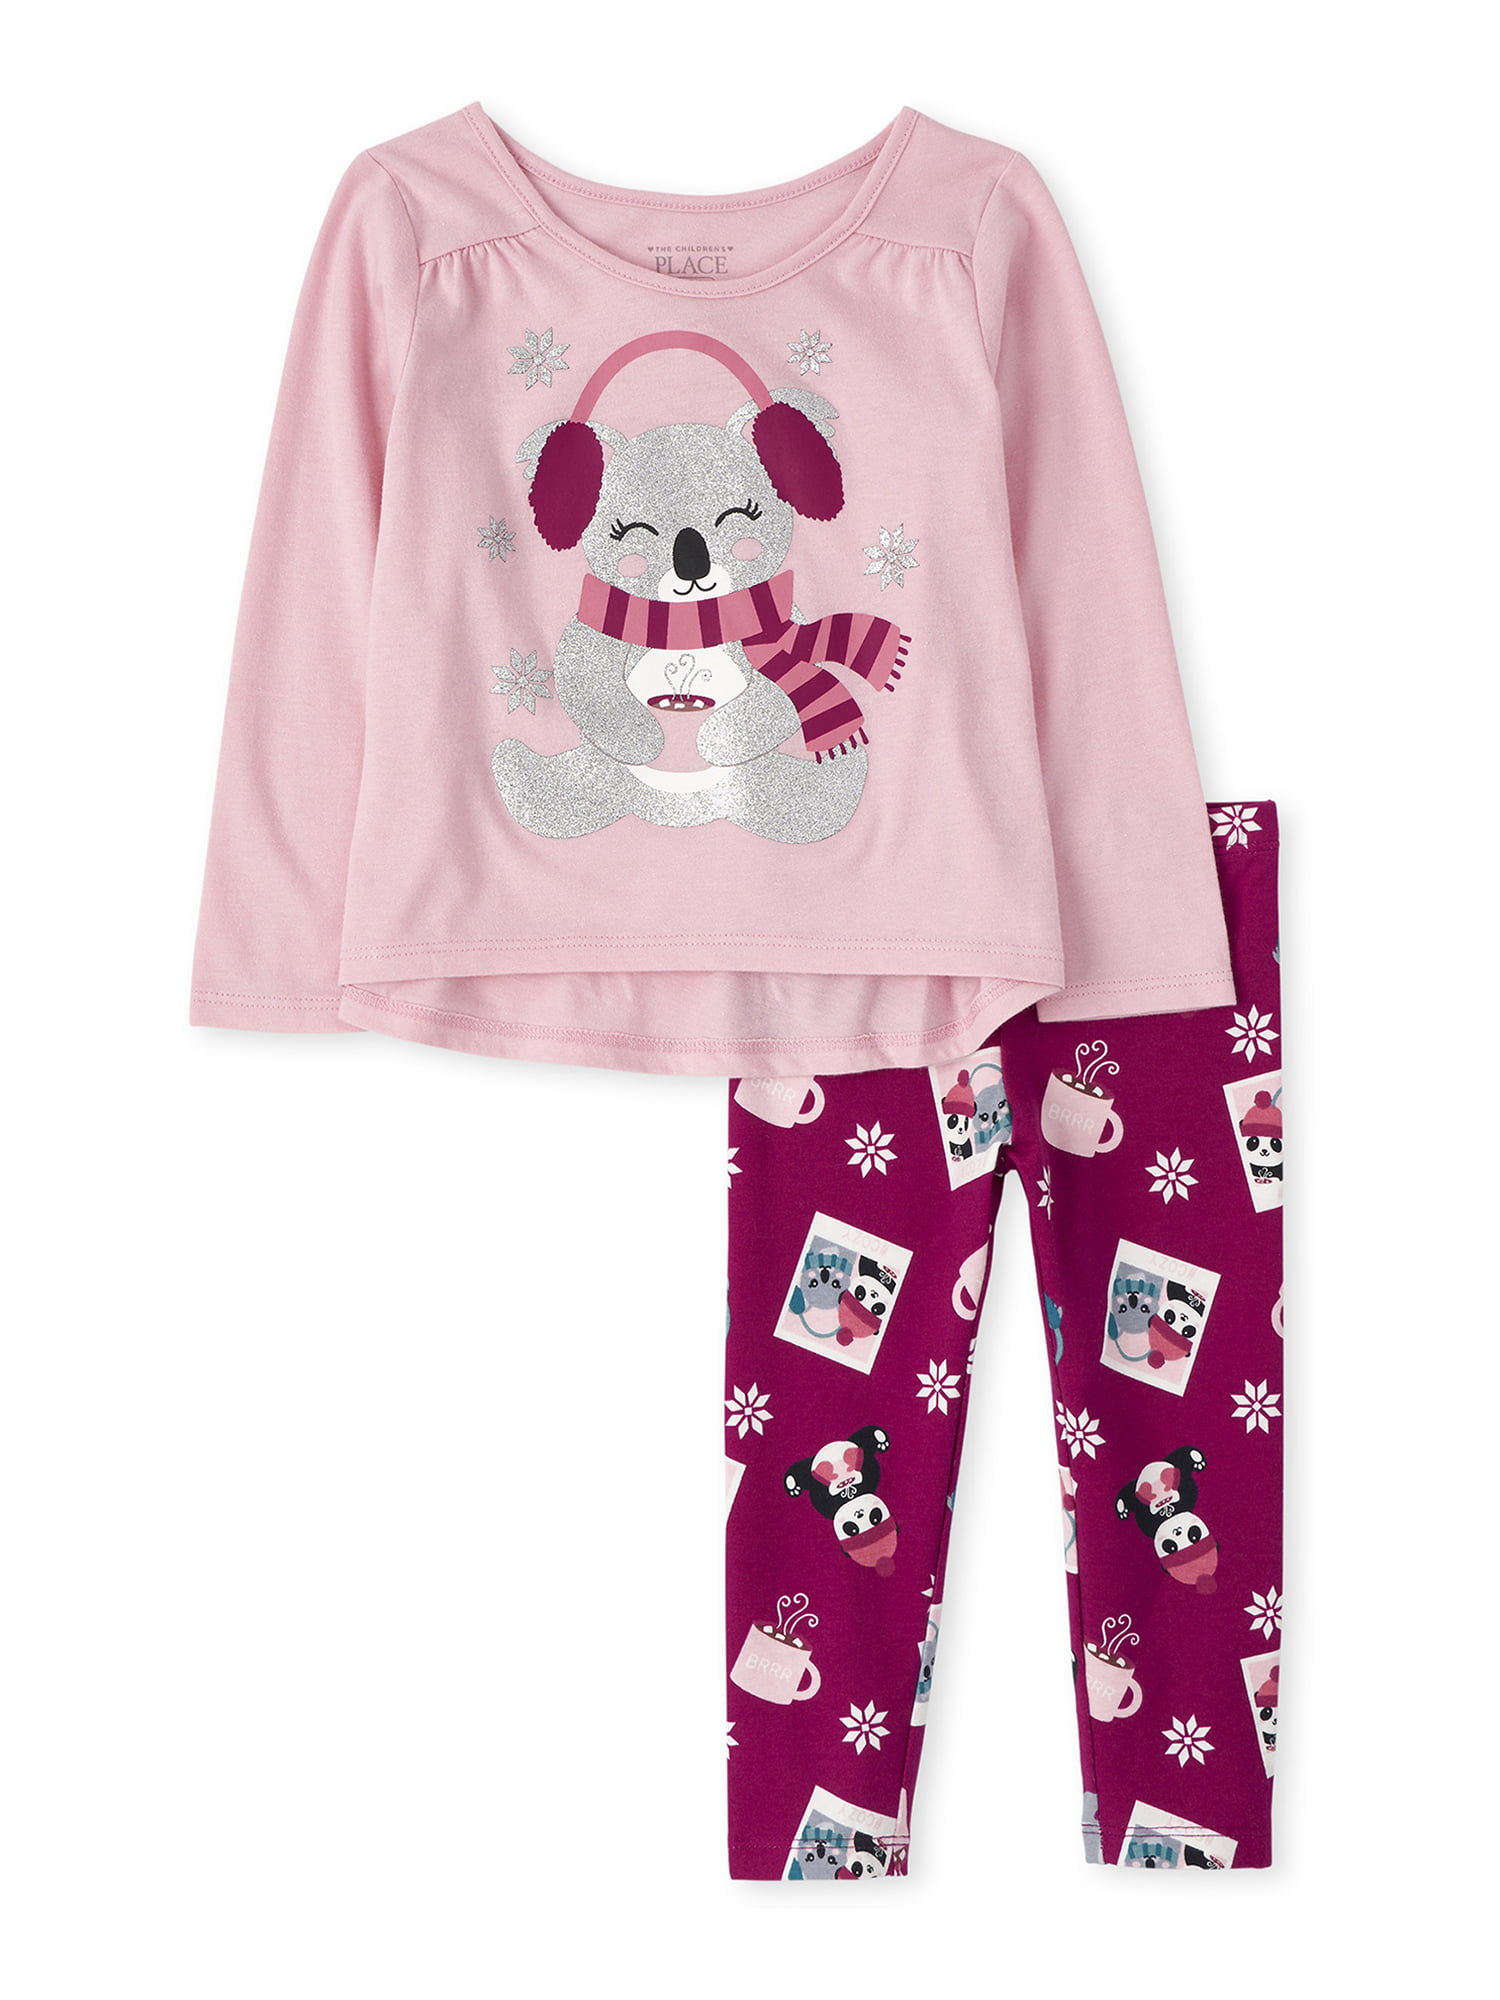 The Childrens Place Girls Long Sleeve Top and Pants Pajama Set 